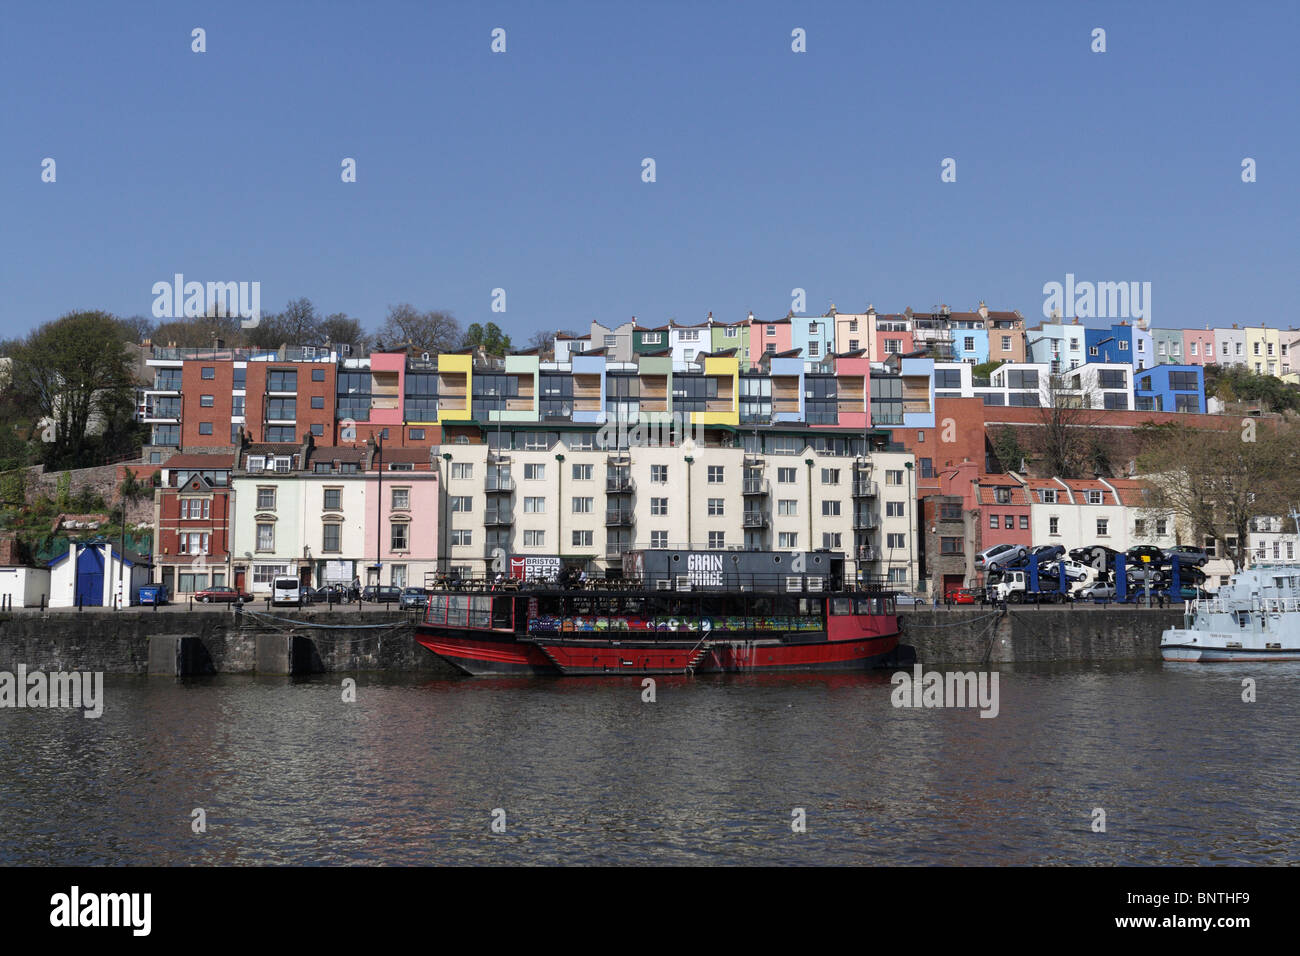 Bristol harbour and colourful houses hillside, Bristol England UK. River Avon quayside and waterfront residential buildings Stock Photo